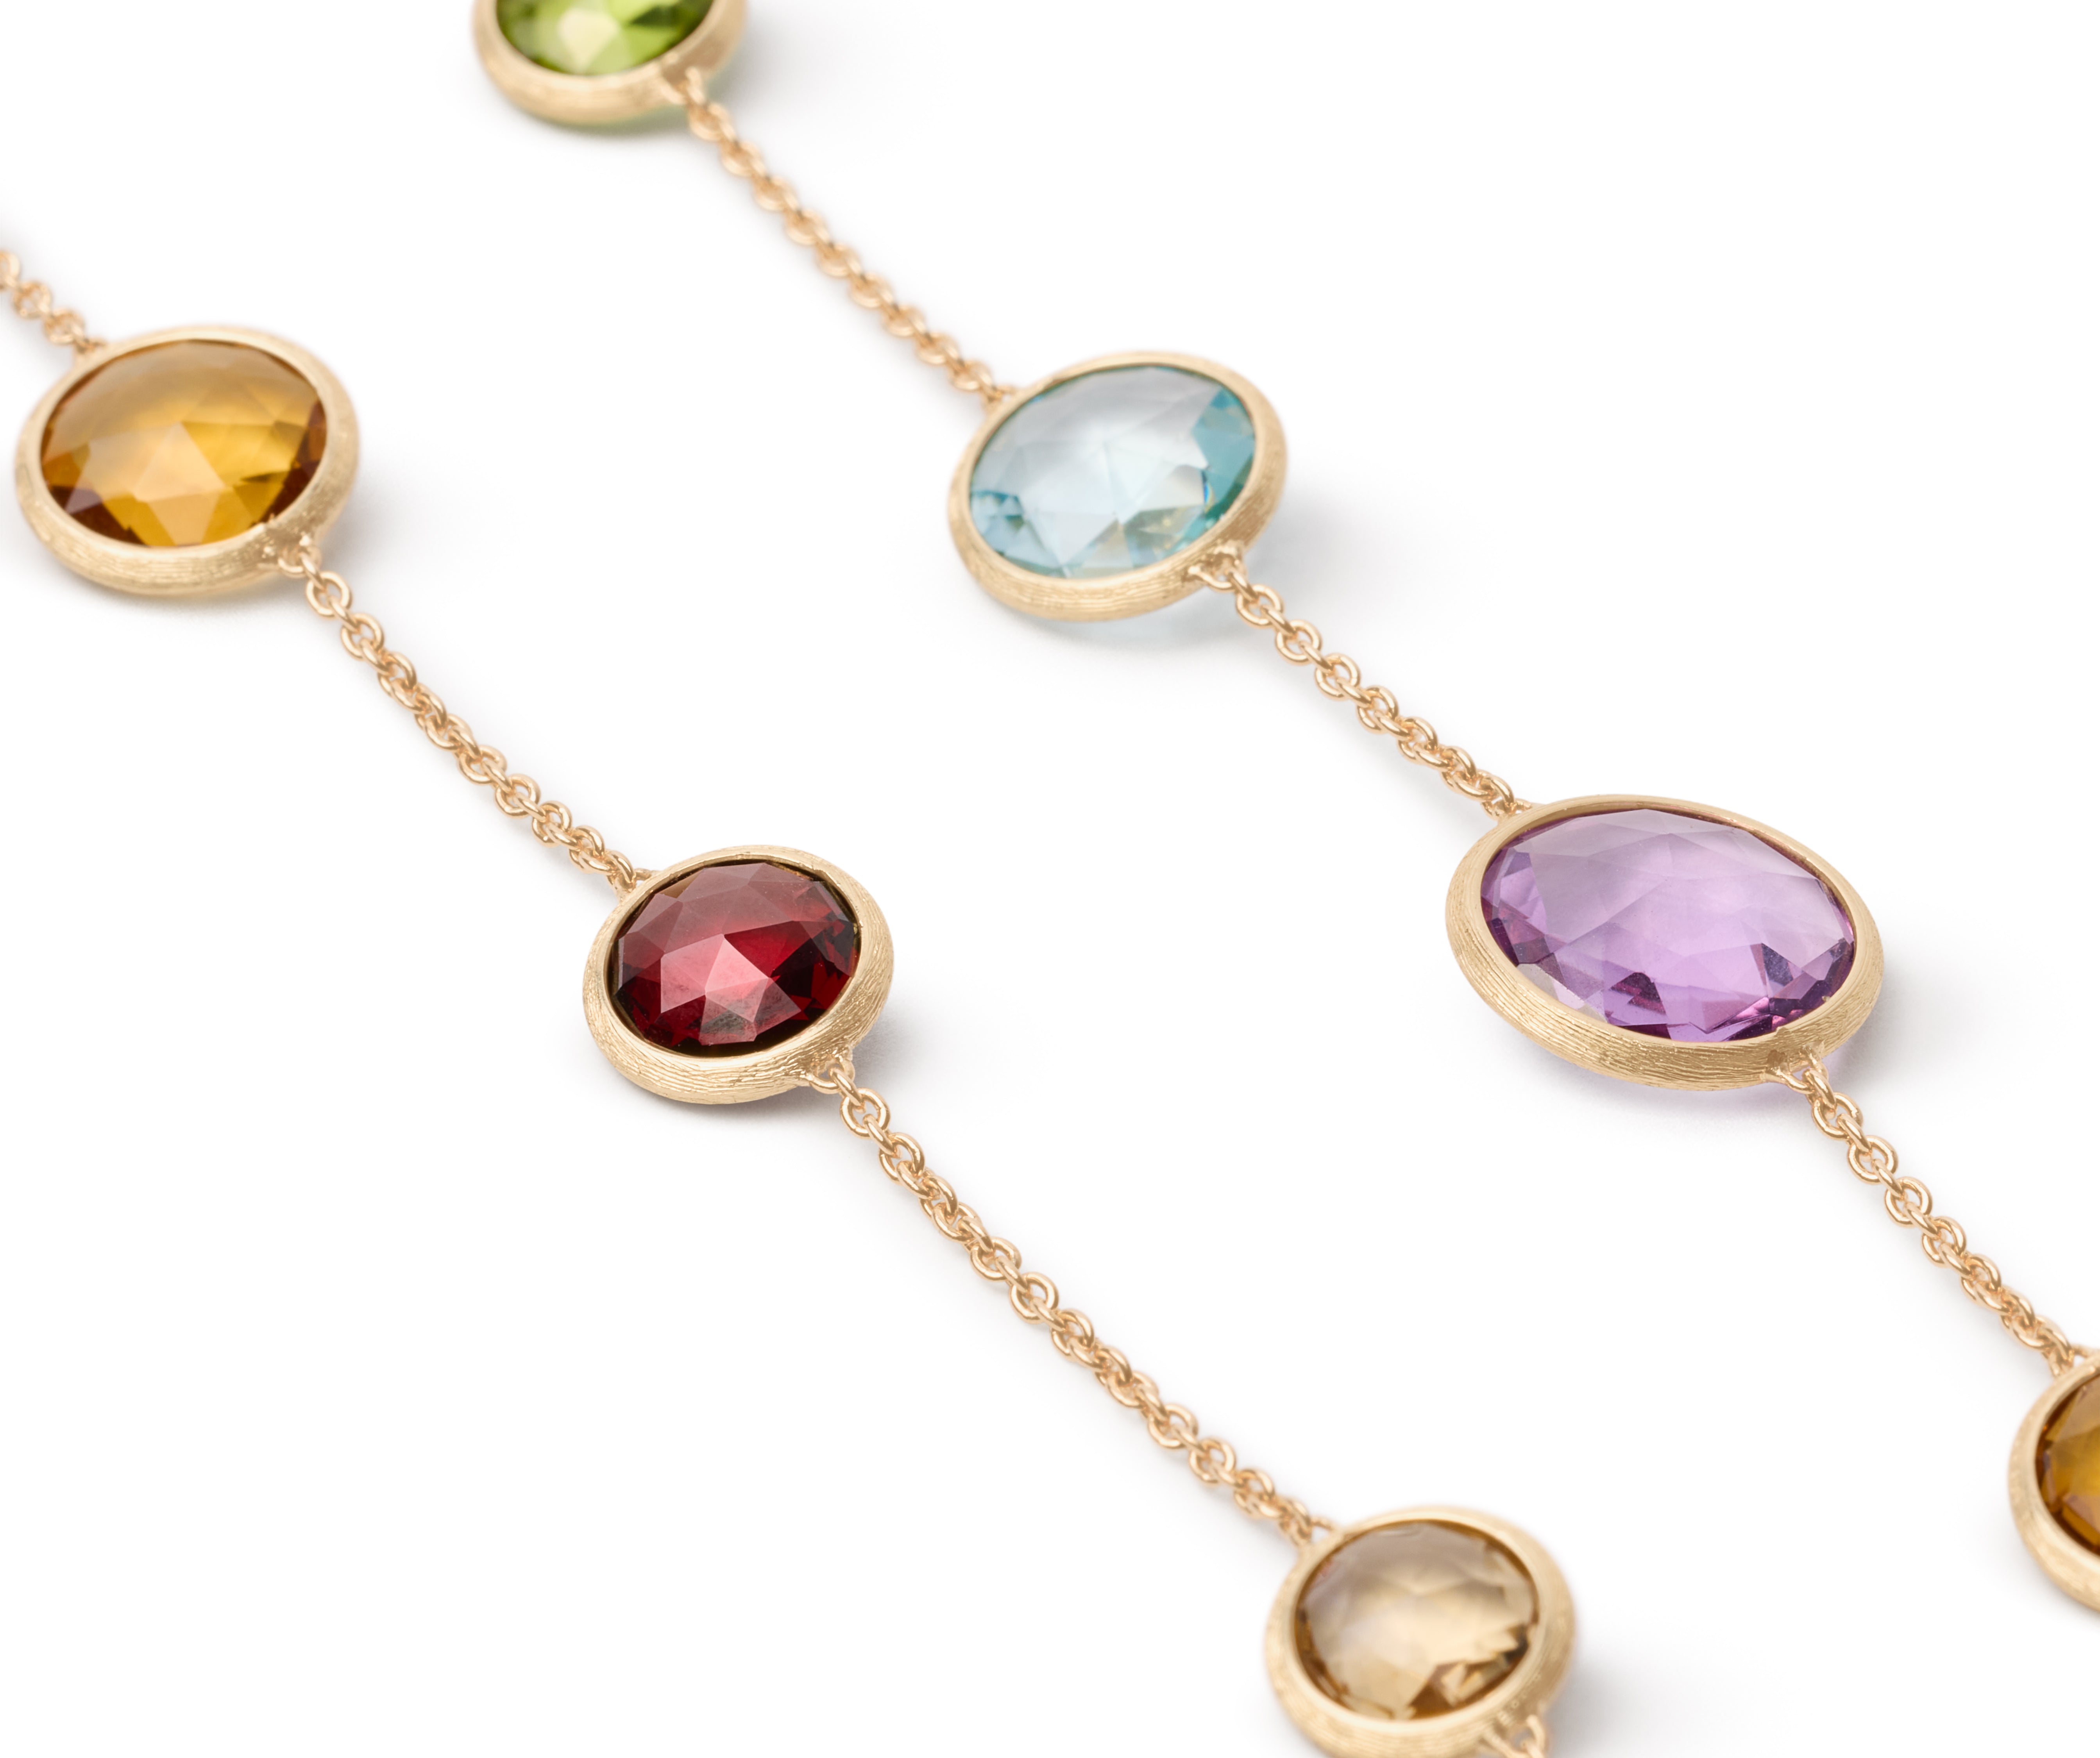 Marco Bicego 18k Yellow Gold Colored Gemstone Necklace